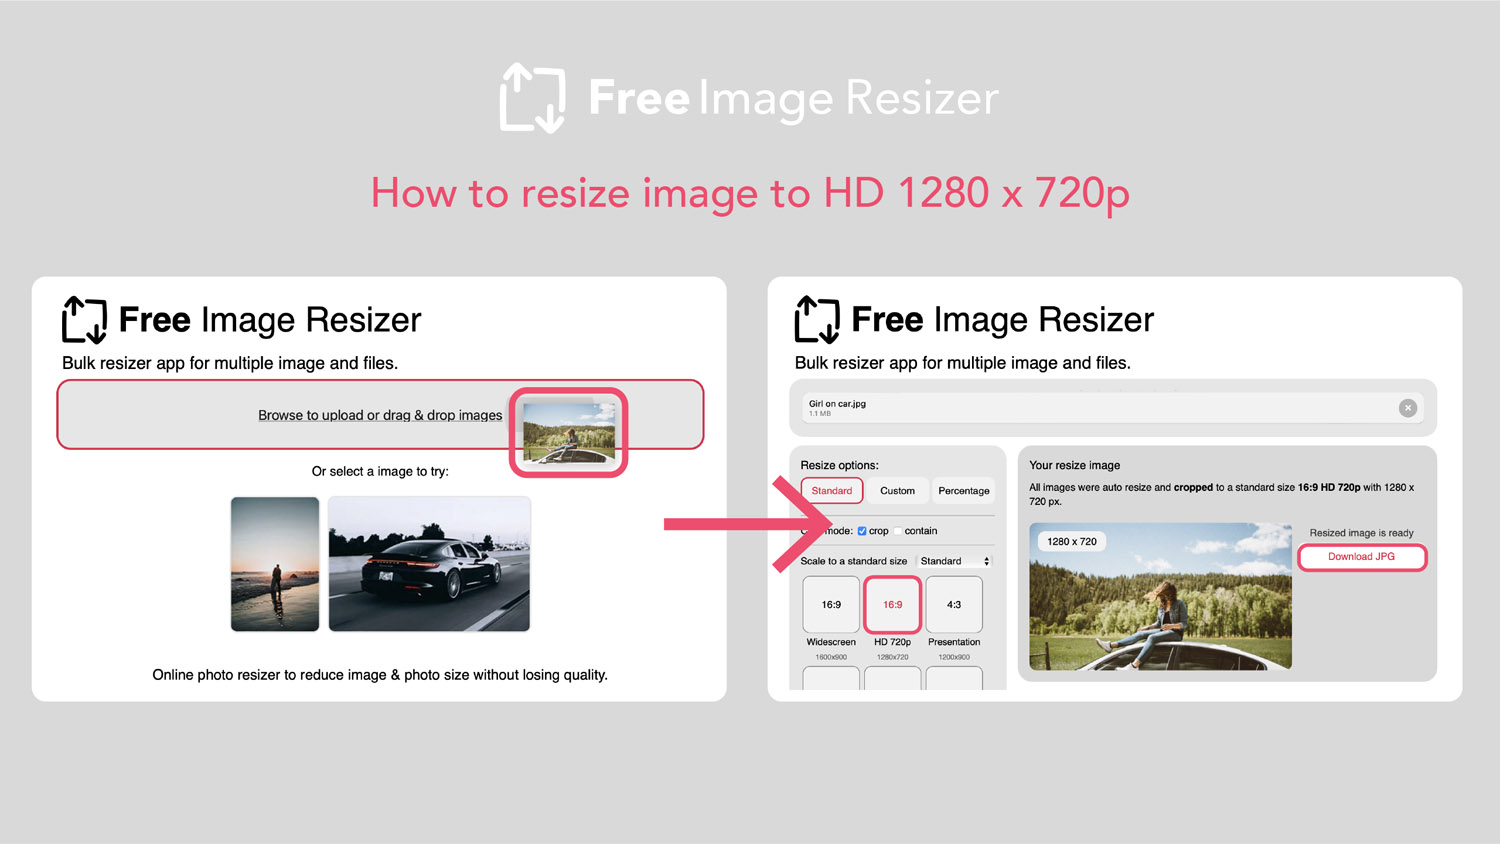 How to resize image to 720p or 1280x720